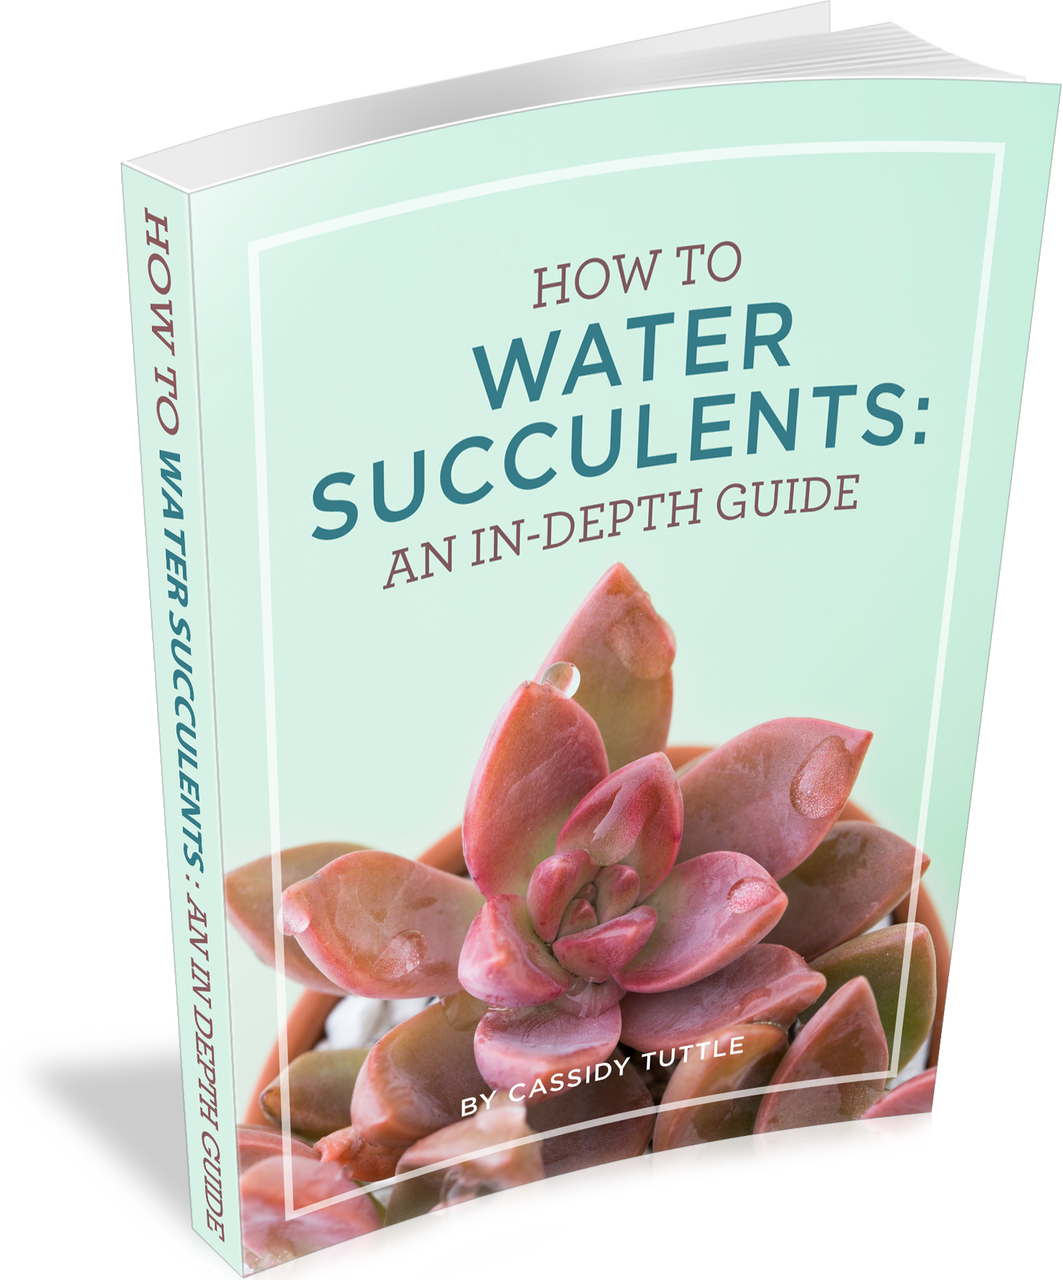 How to Water Succulents: An In-Depth Guide (E-Book) Questions & Answers